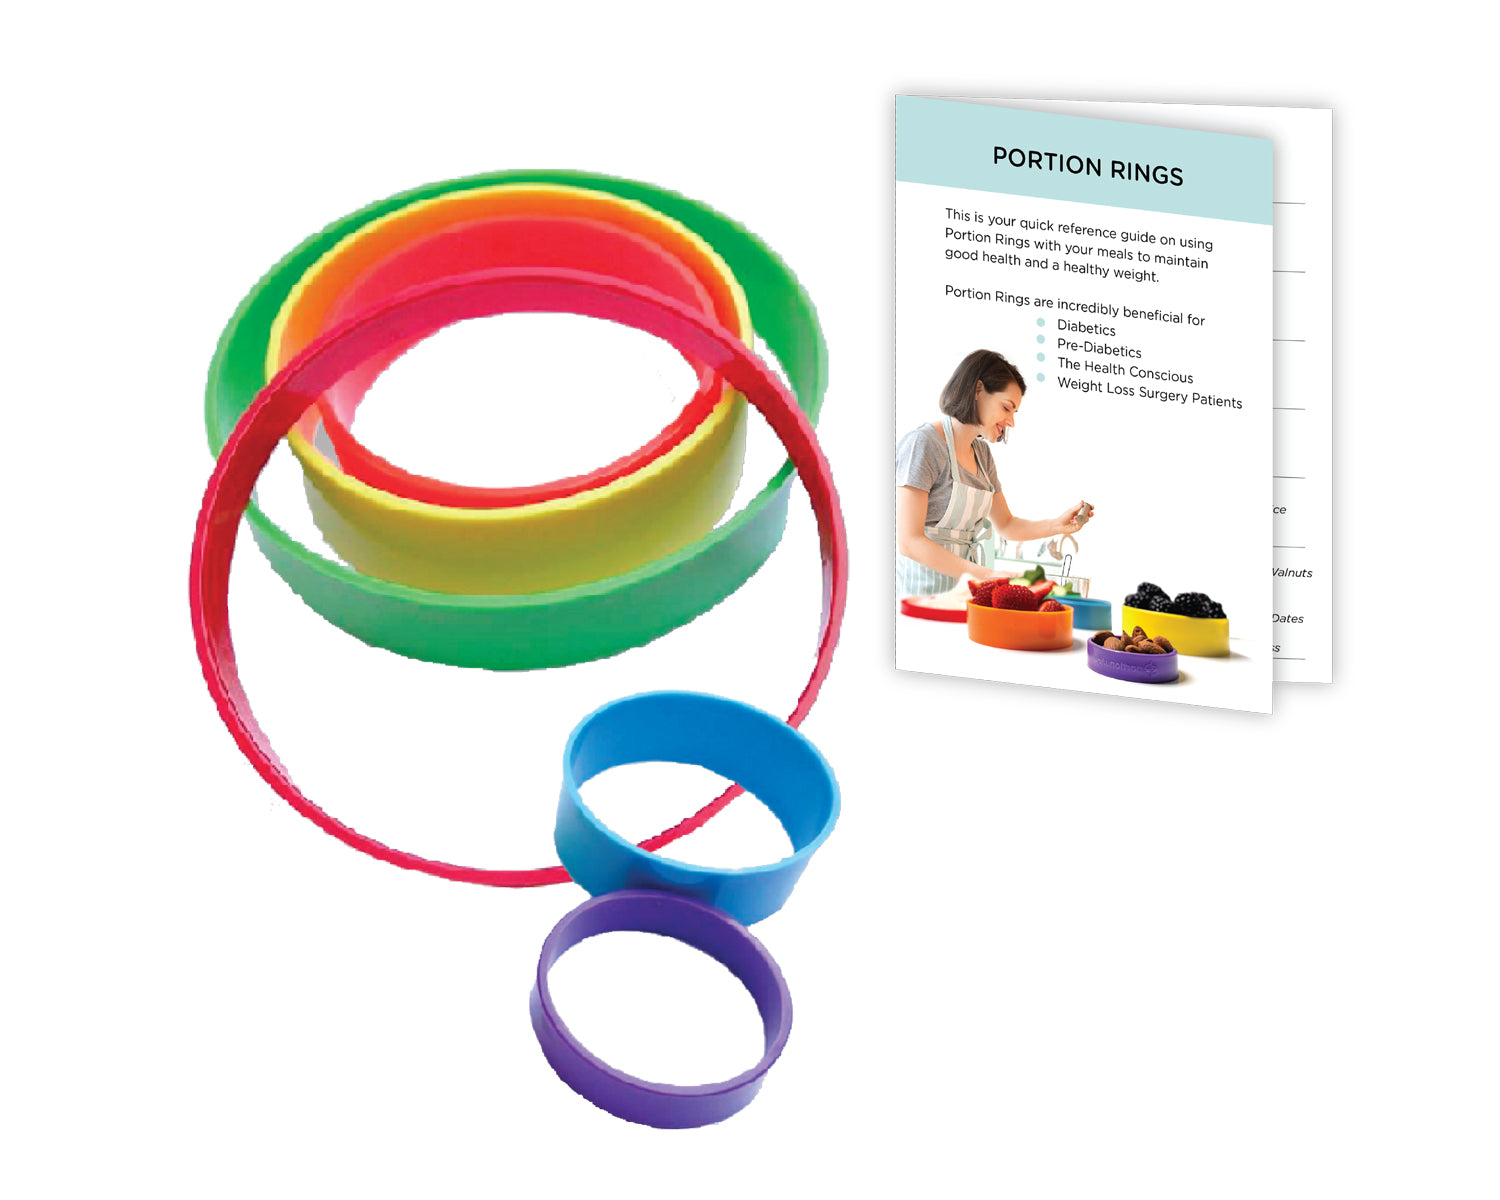 Portion Control Rings and reference guide